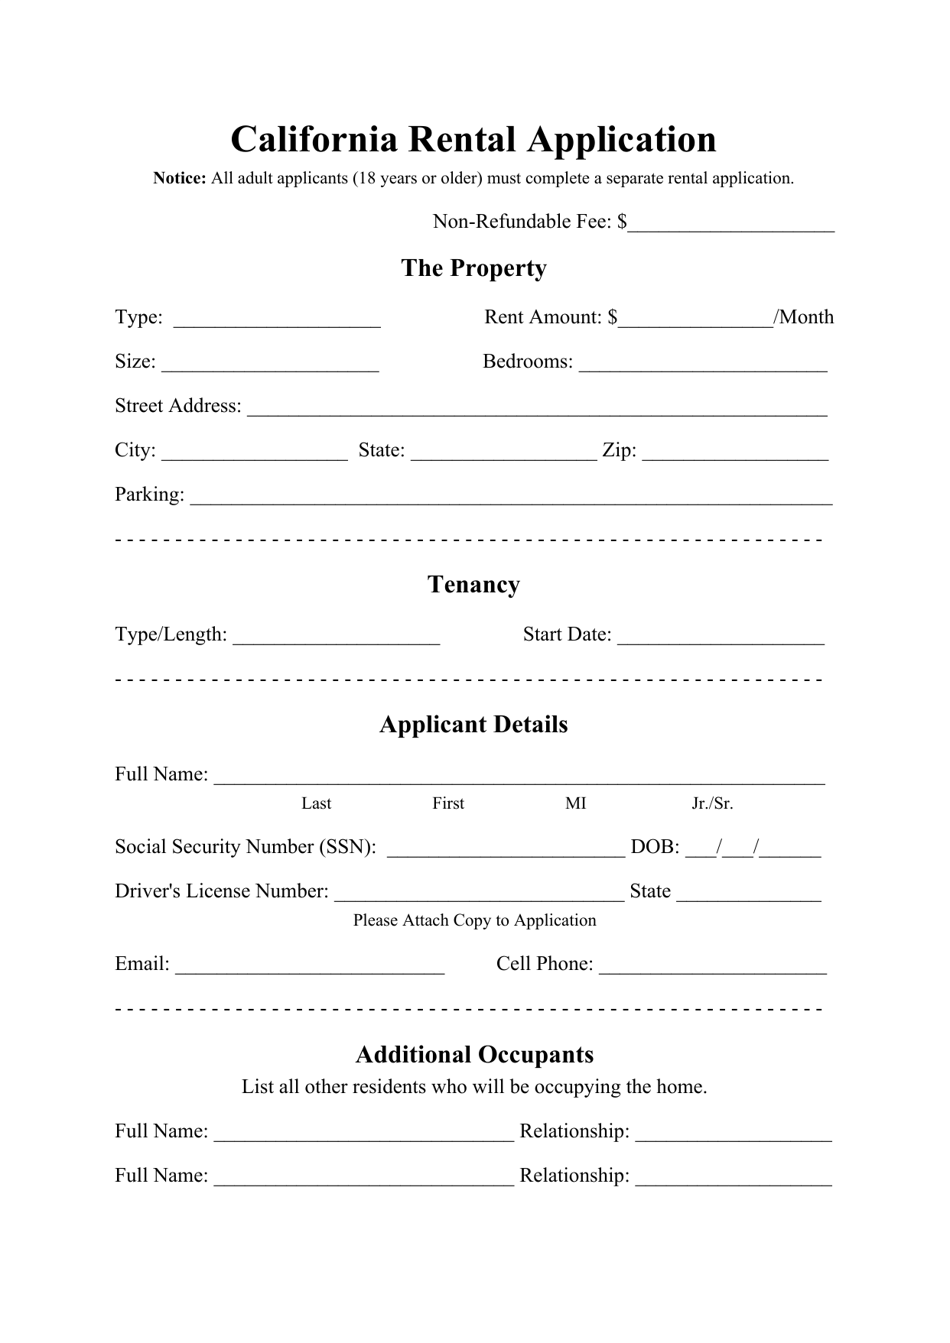 Rental Application Form - California, Page 1